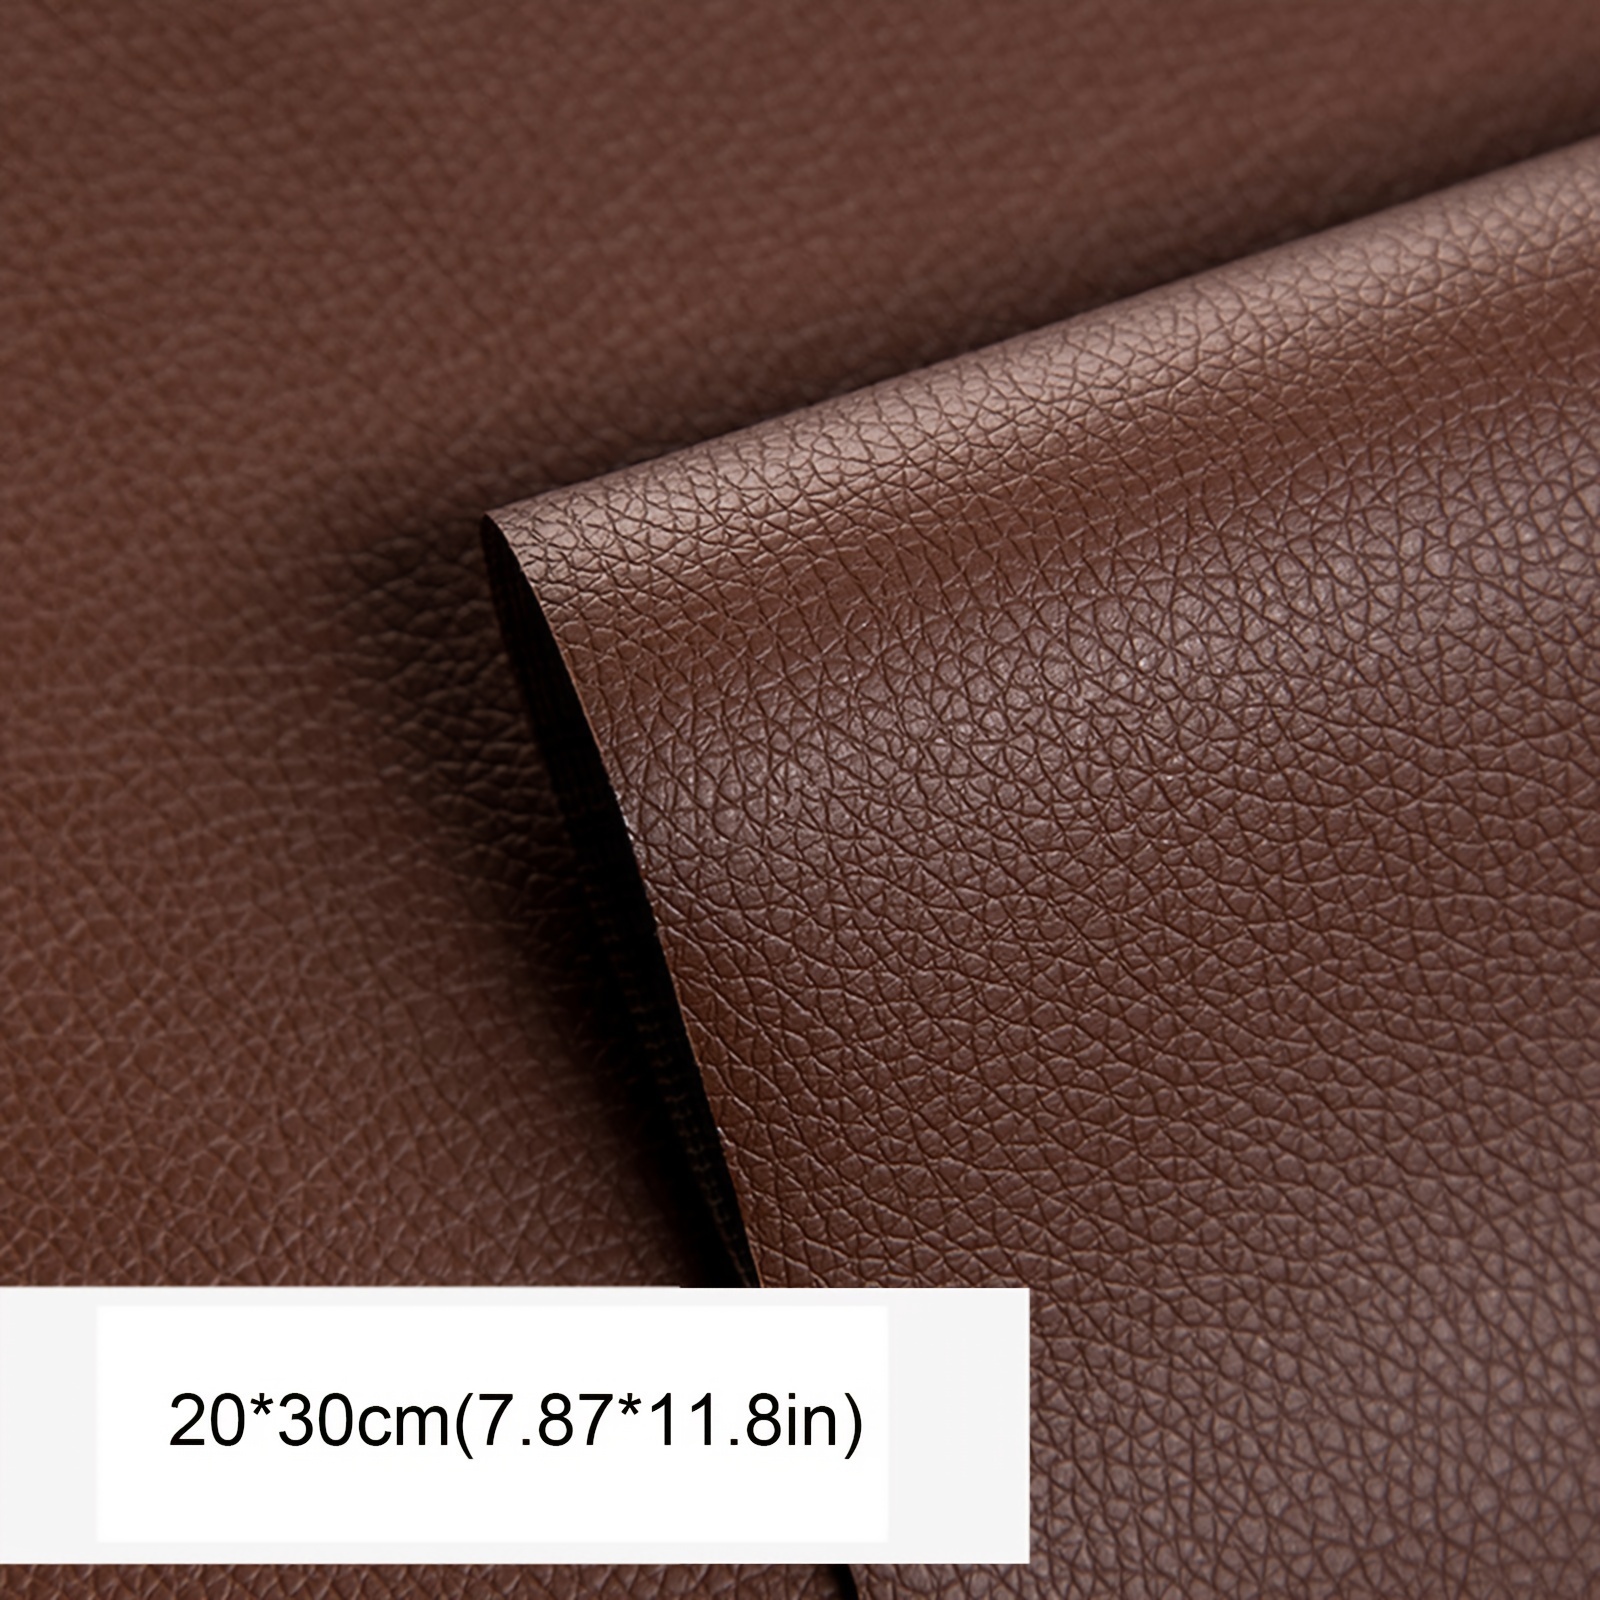 20*30cm self-adhesive leather repair patch leather